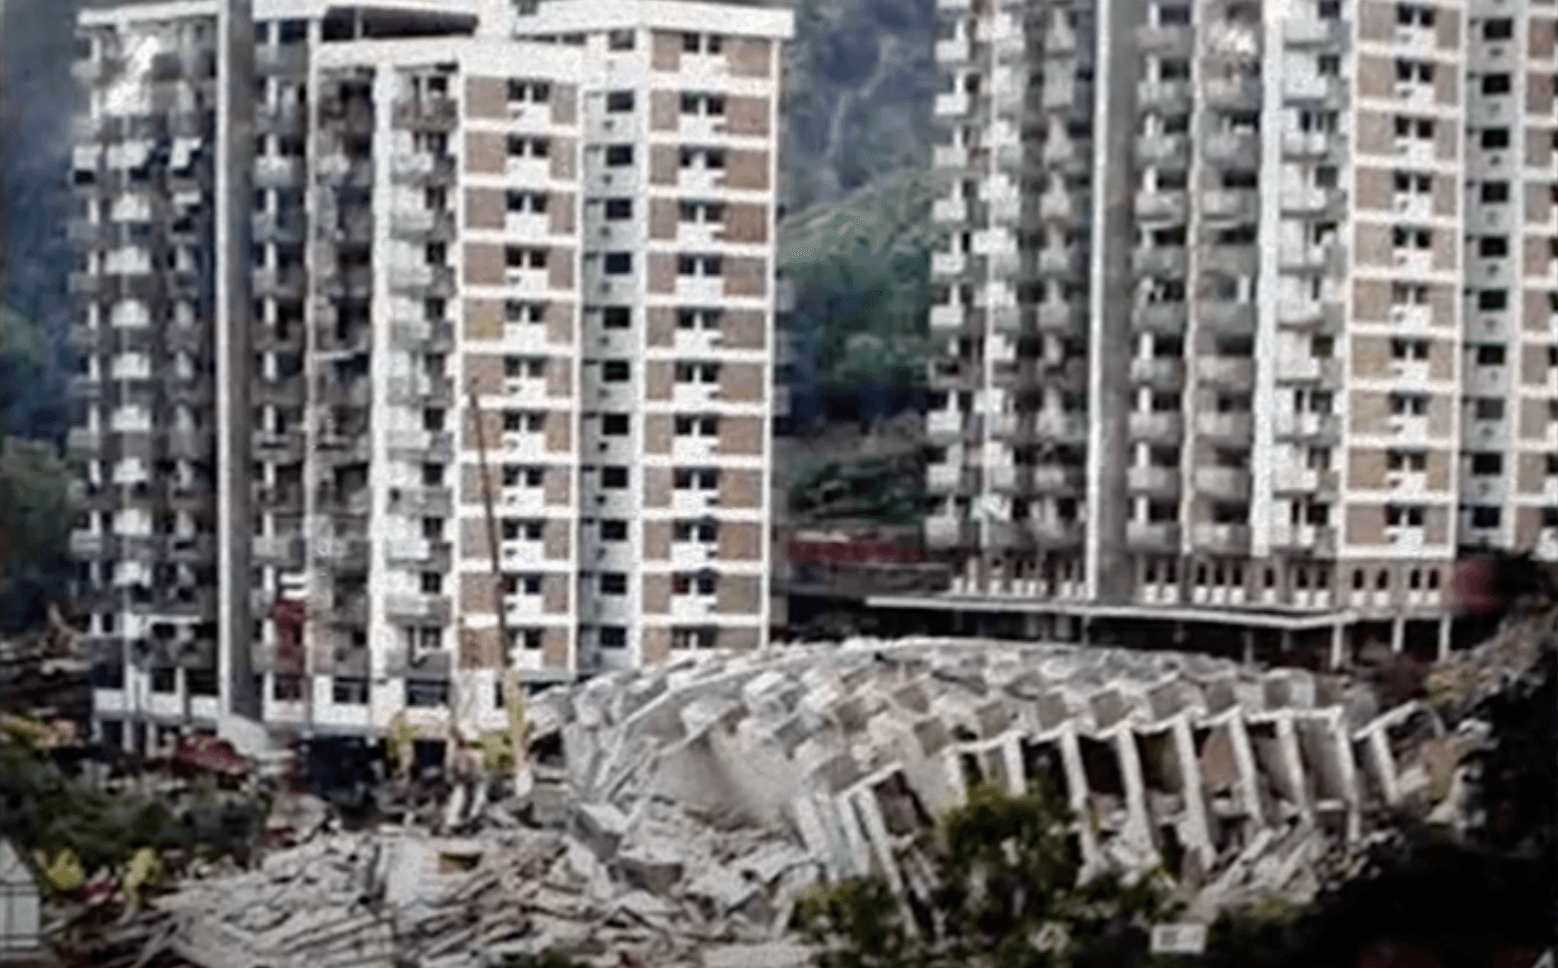 An image of the Highland Towers collapse in Ulu Kelang which claimed 48 lives in 1993.